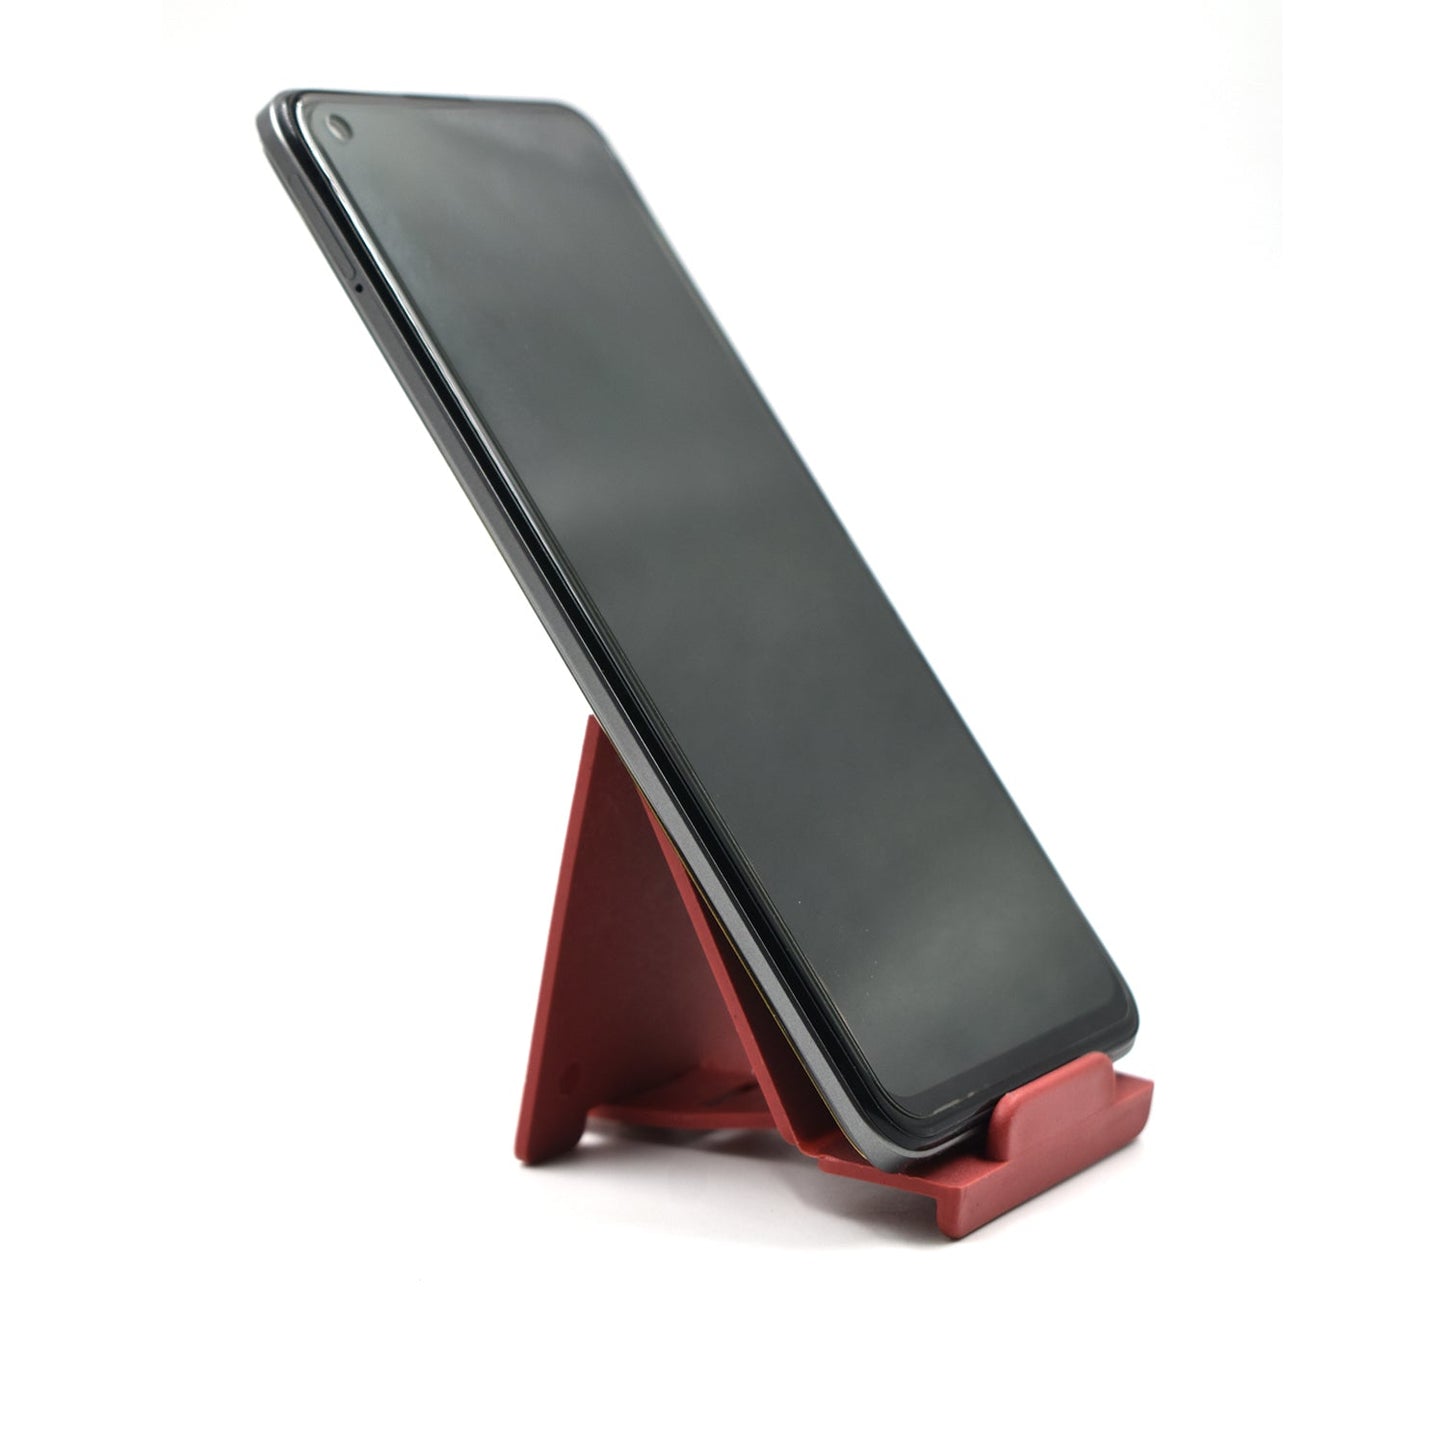 4793 10 Pc Adjustable Mobile Stand used in all kinds of places including household and offices as a mobile supporting stand. DeoDap